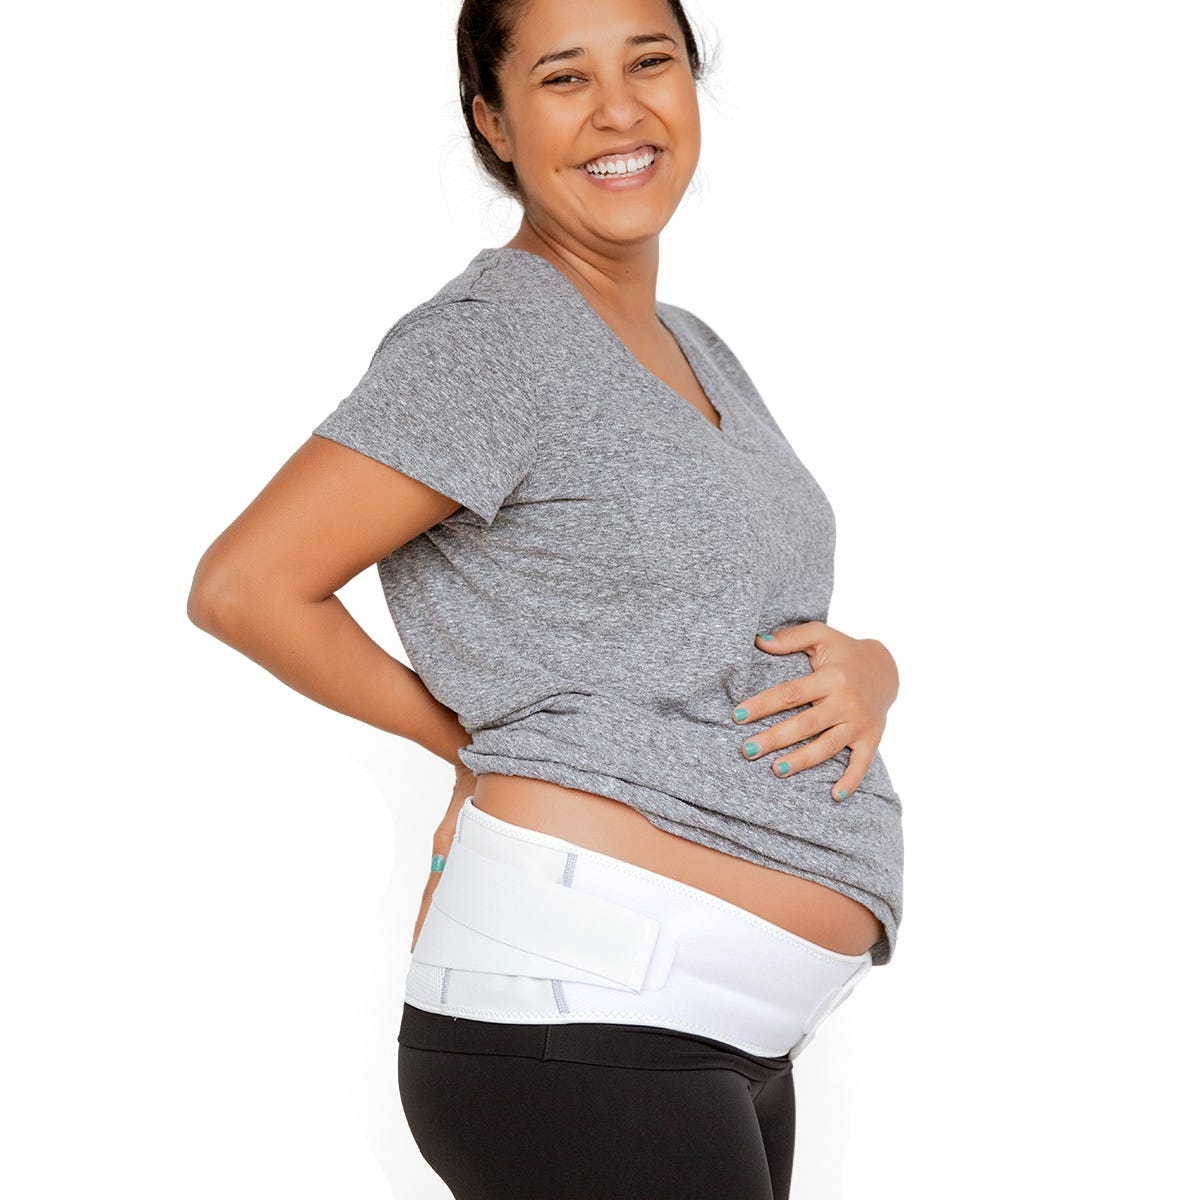 Maternity Belly Band Belt Super Light Stretchable Supportive Washable 2 Colors 